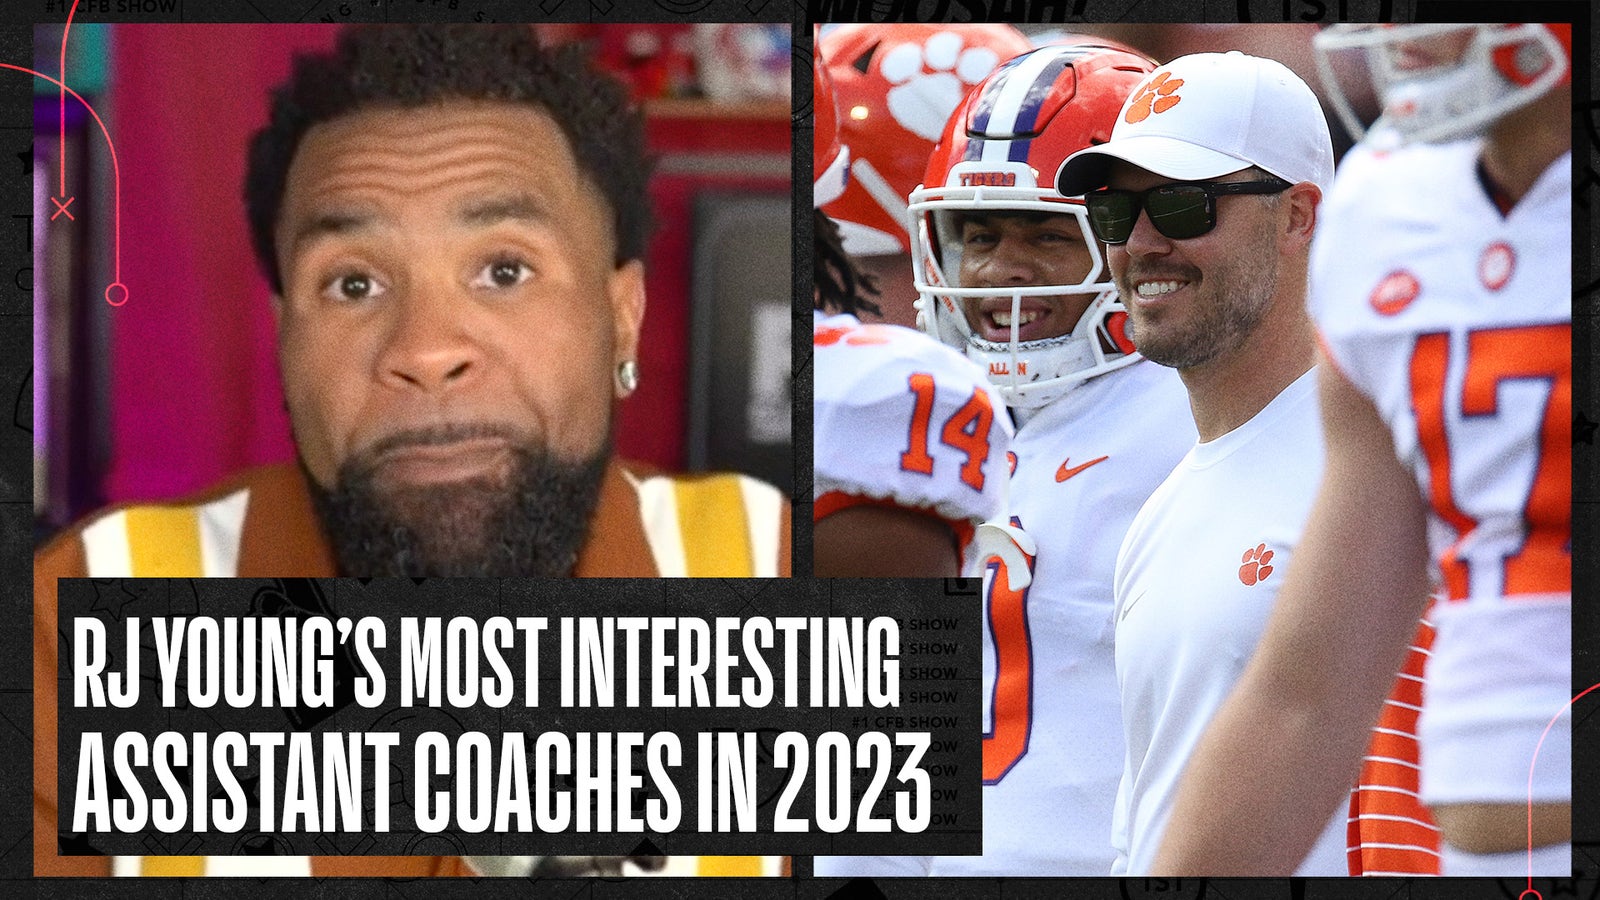 USC, Oklahoma headline most Intriguing assistant coaches in 2023